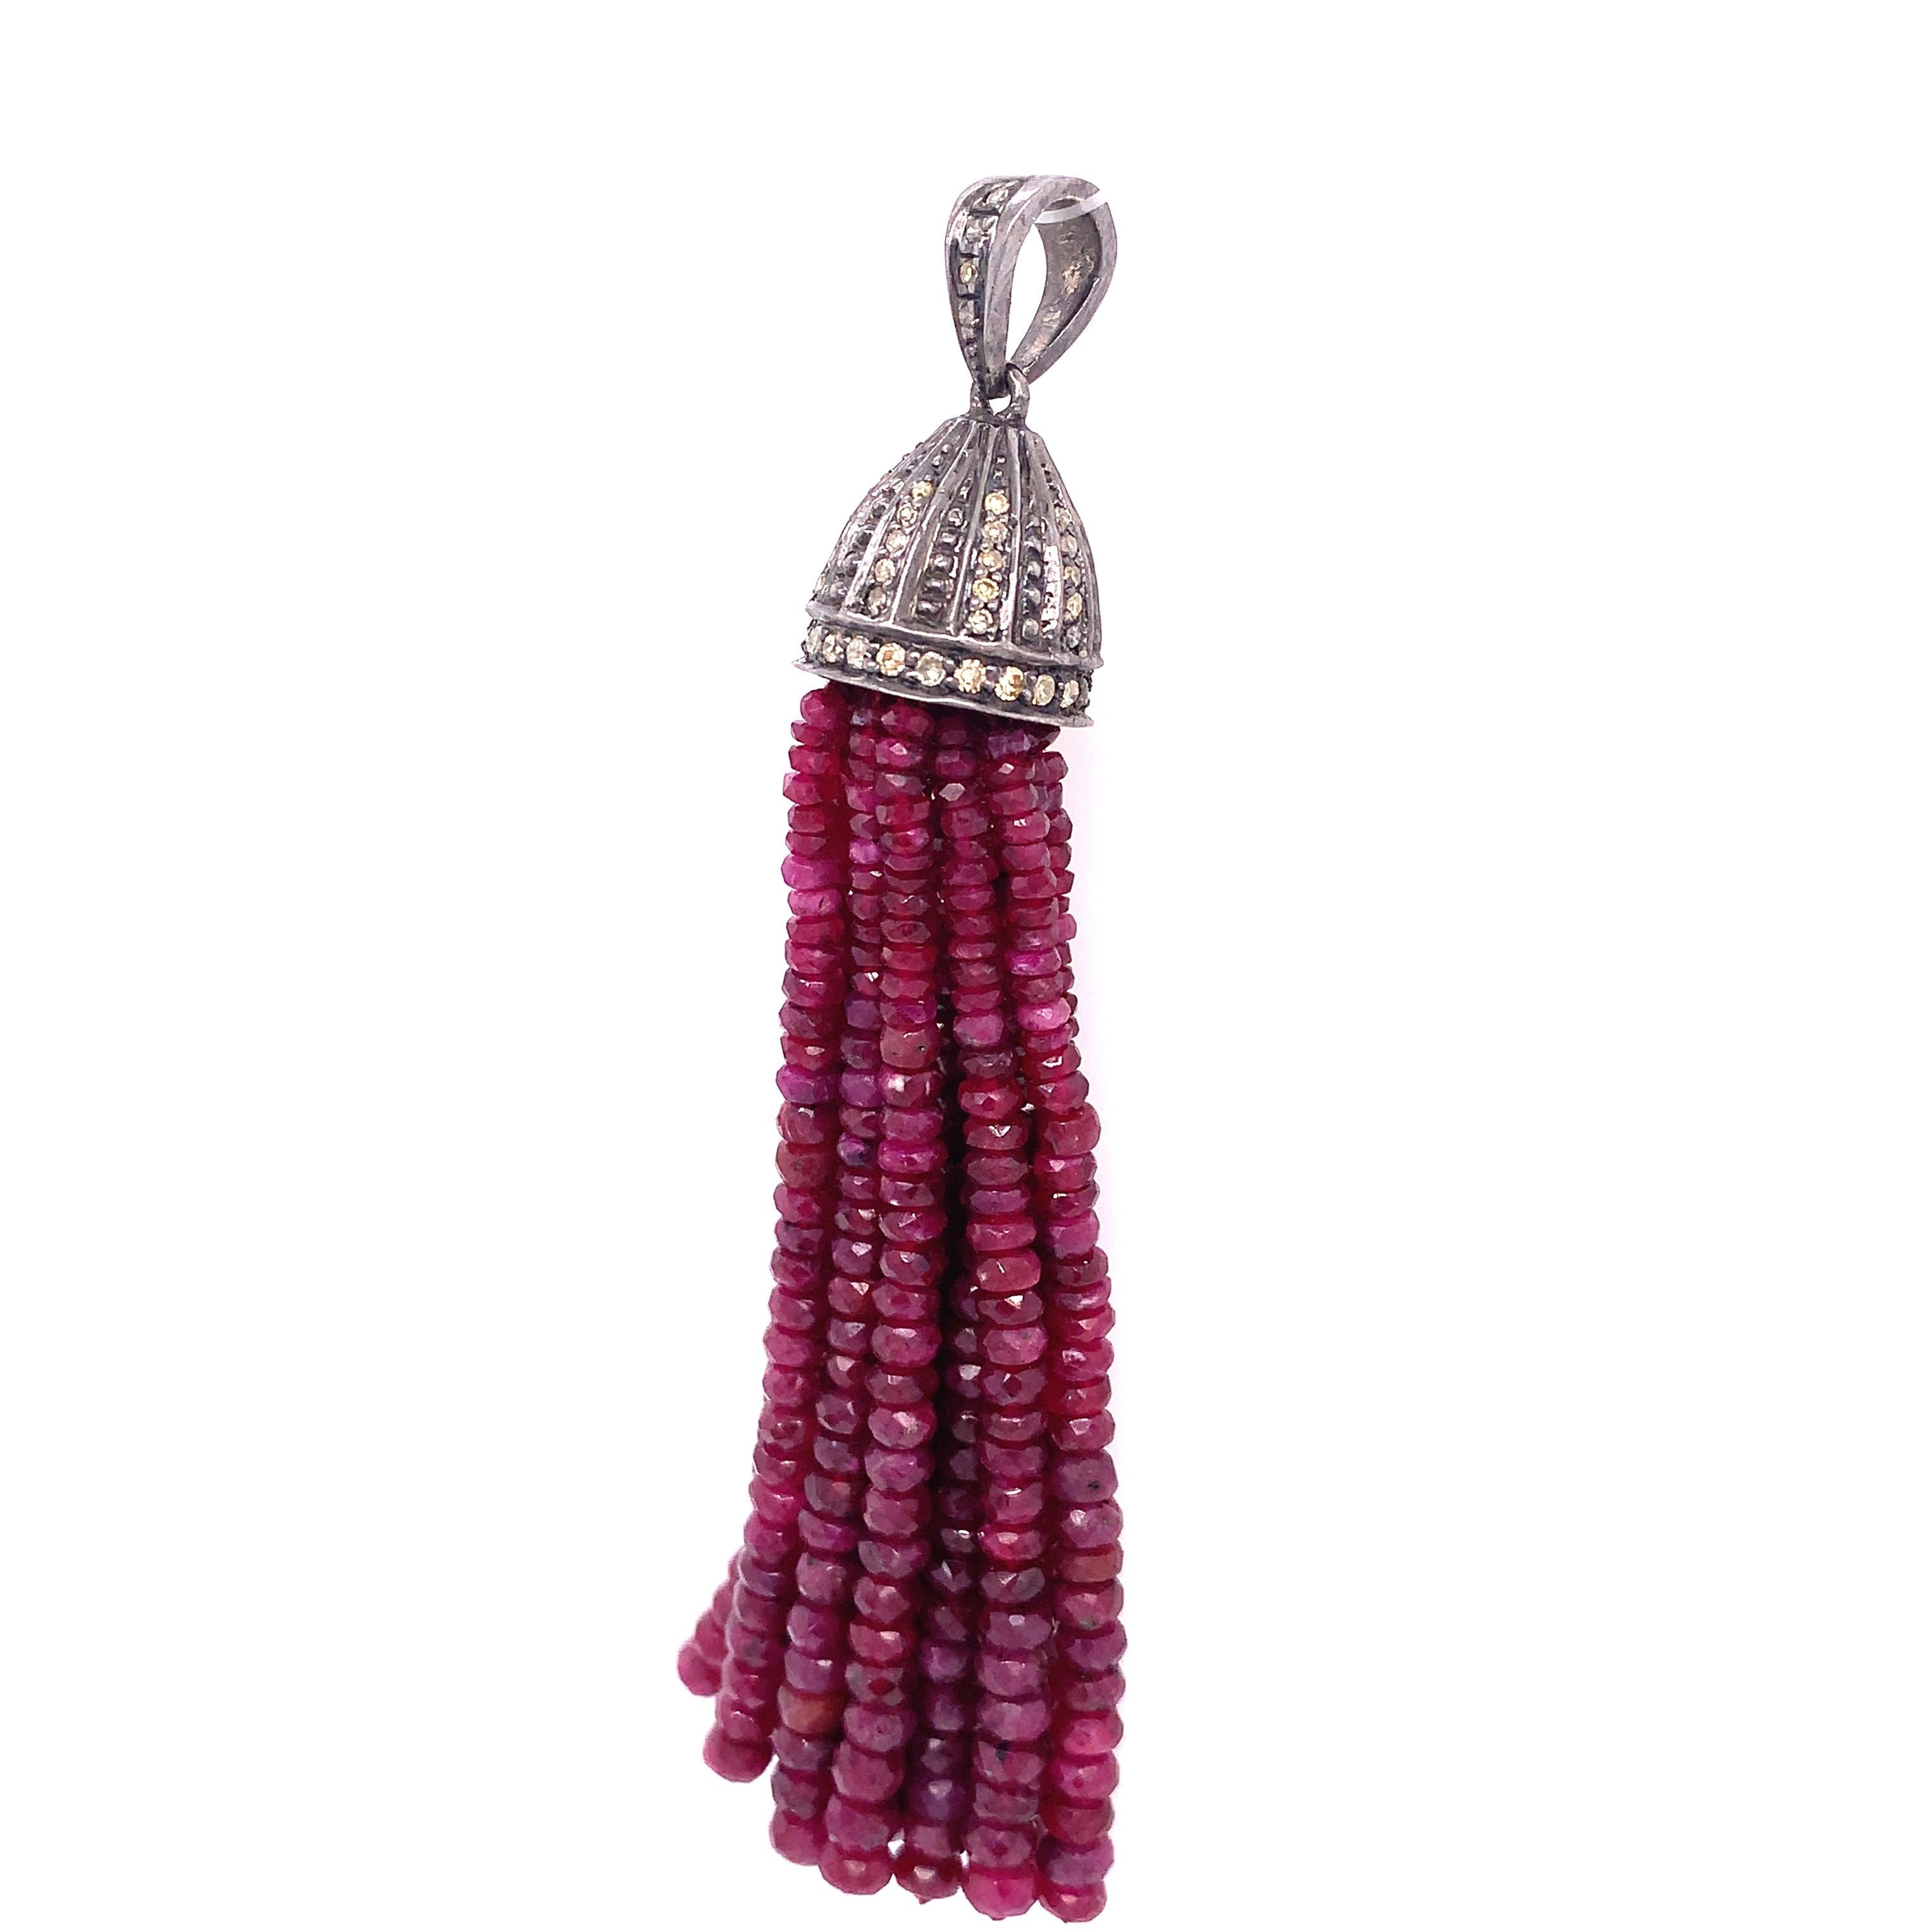 Life in Color Collection

Rustic Diamond with Ruby bead tassel pendant set in darkened sterling silver. 

Ruby: 104.75 ct total weight. 
Rustic Diamonds: 0.55 ct total weight.
